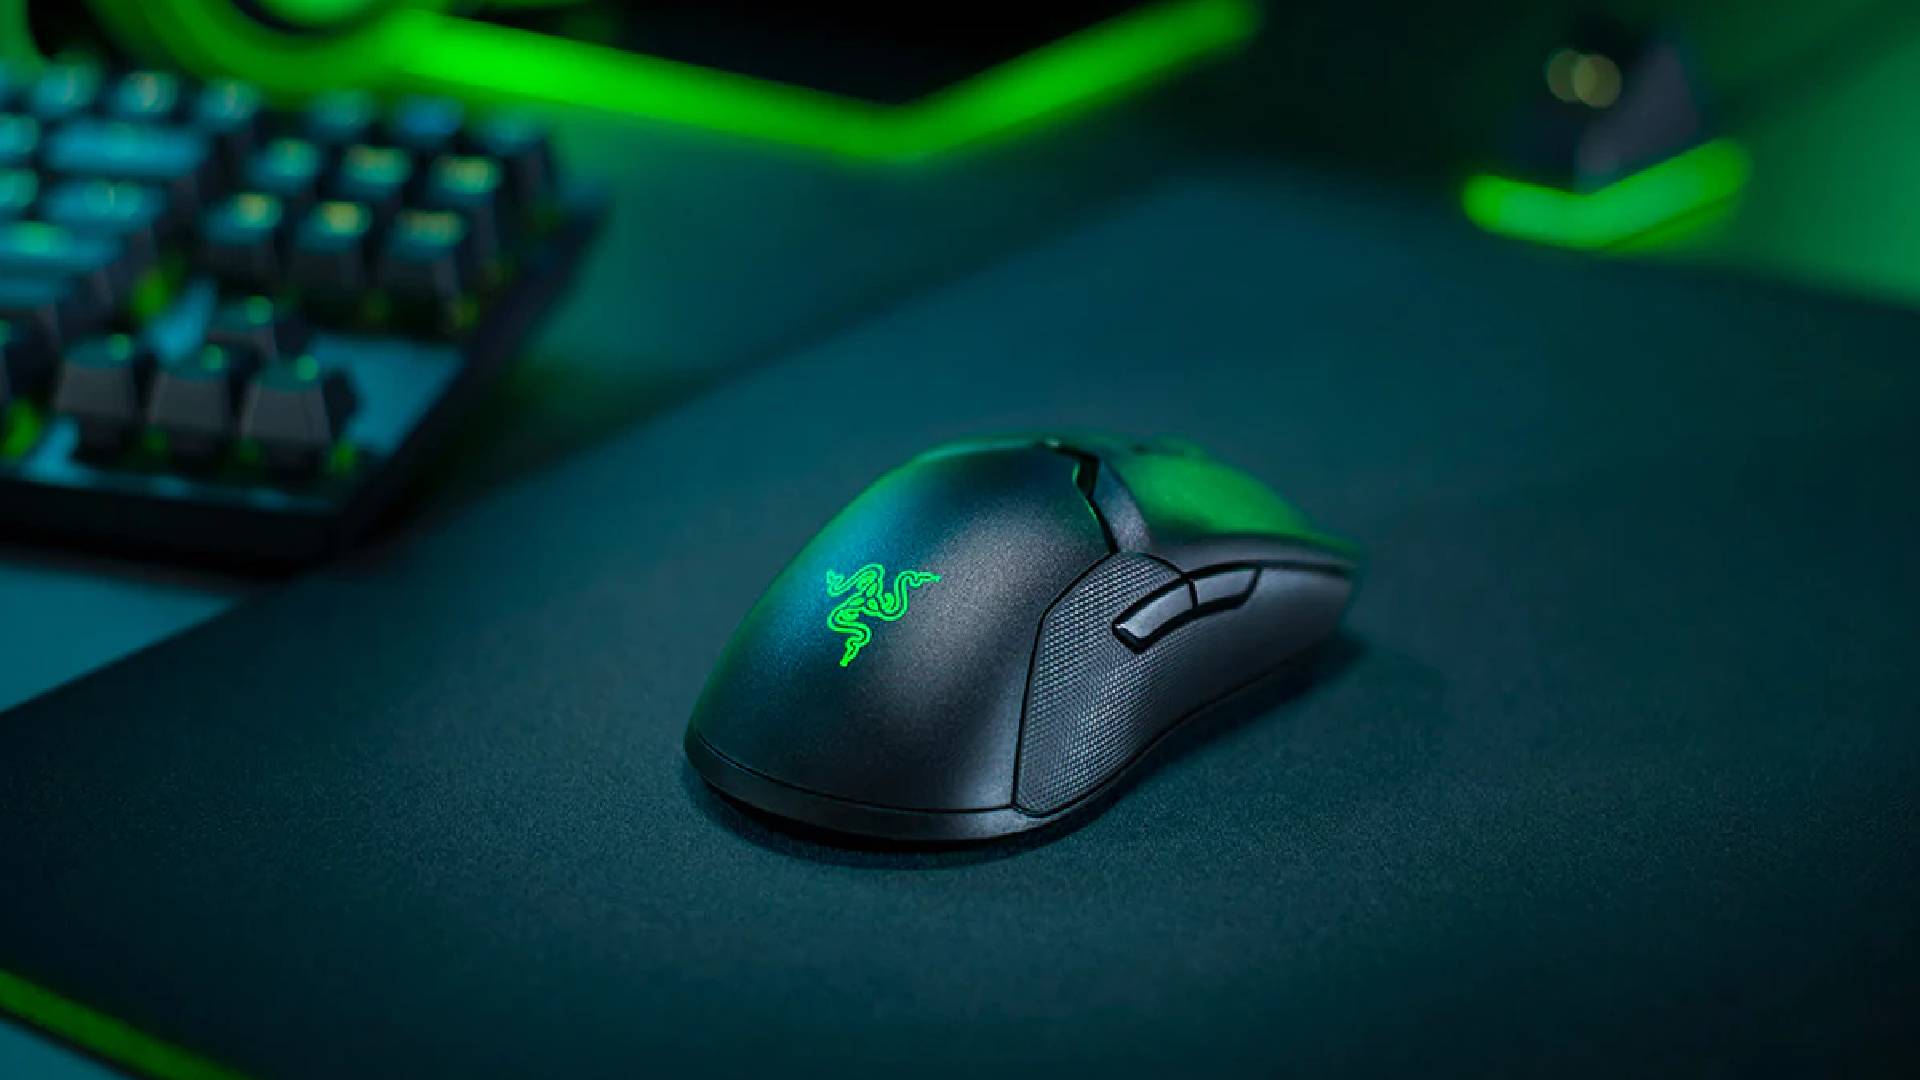 This Razer wireless gaming mouse is at its lowest price ever